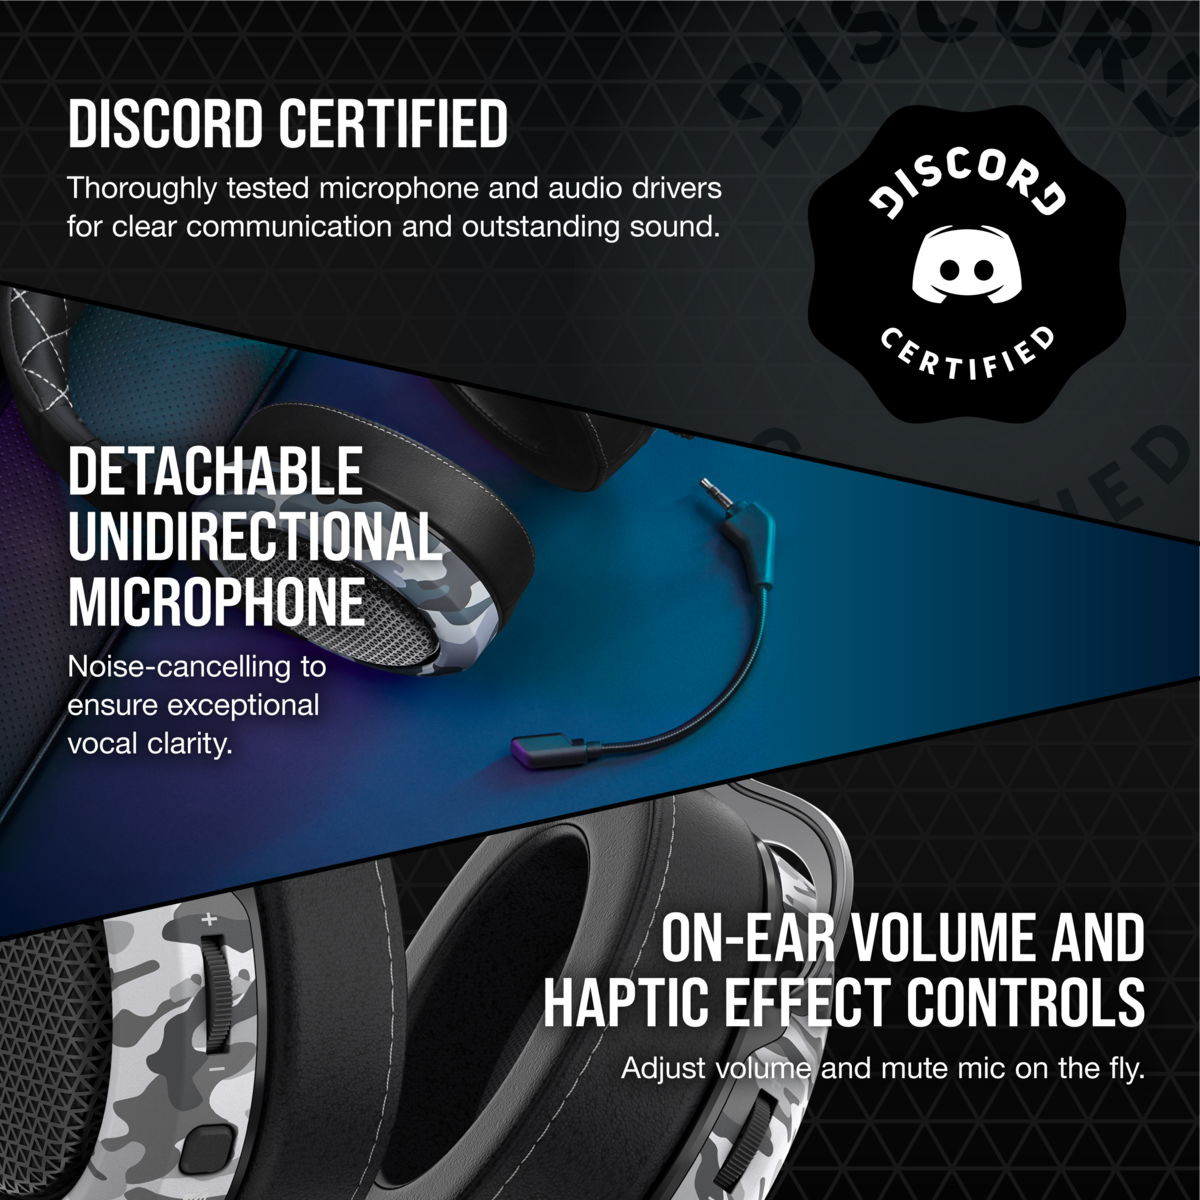 HEADSET AUDIFONOS CORSAIR HS60 HAPTIC Stereo Gaming Headset with Haptic Bass